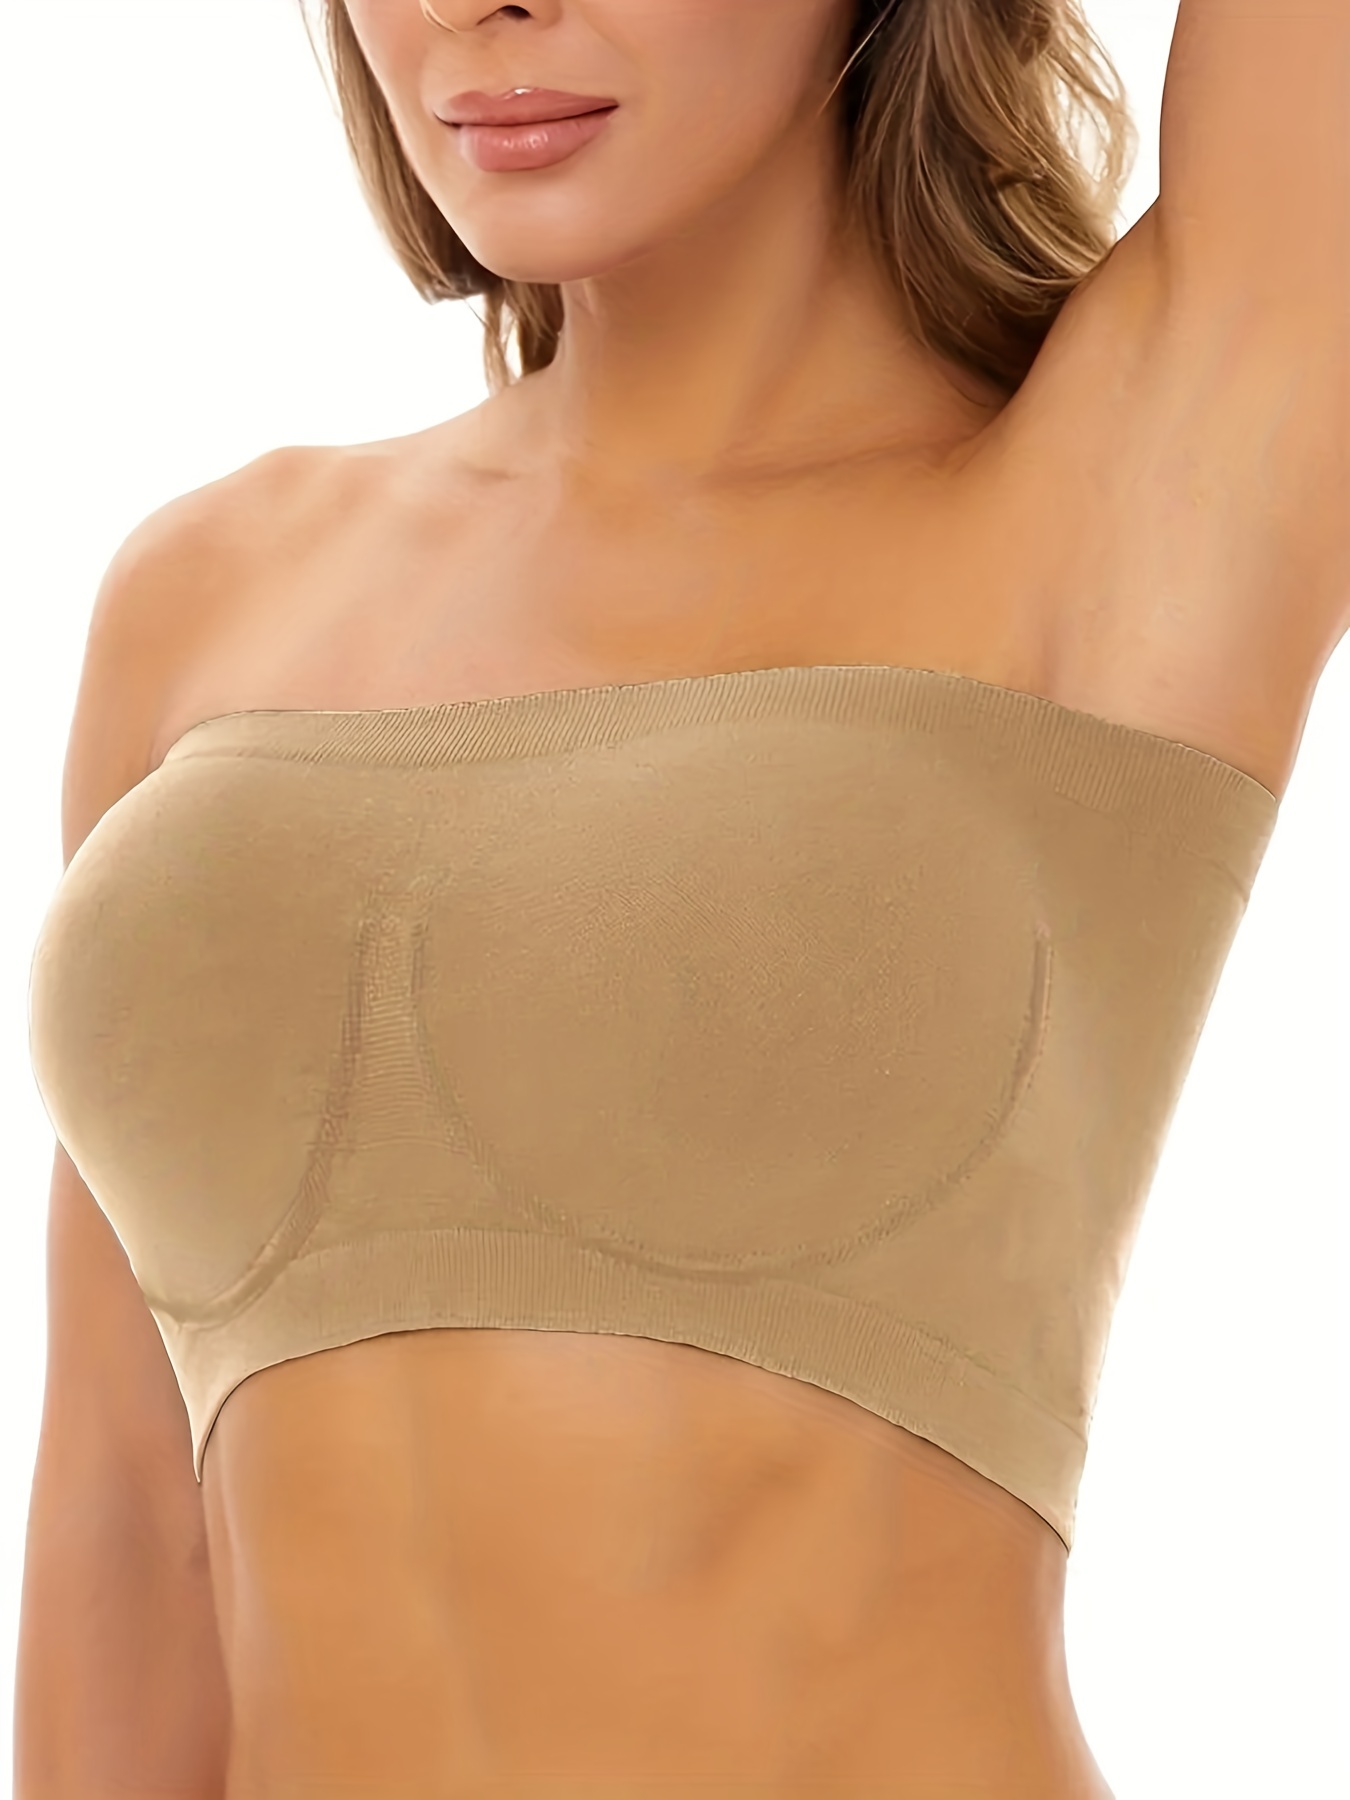 Pack of 5 Compression Tube Bras for Women Strapless and